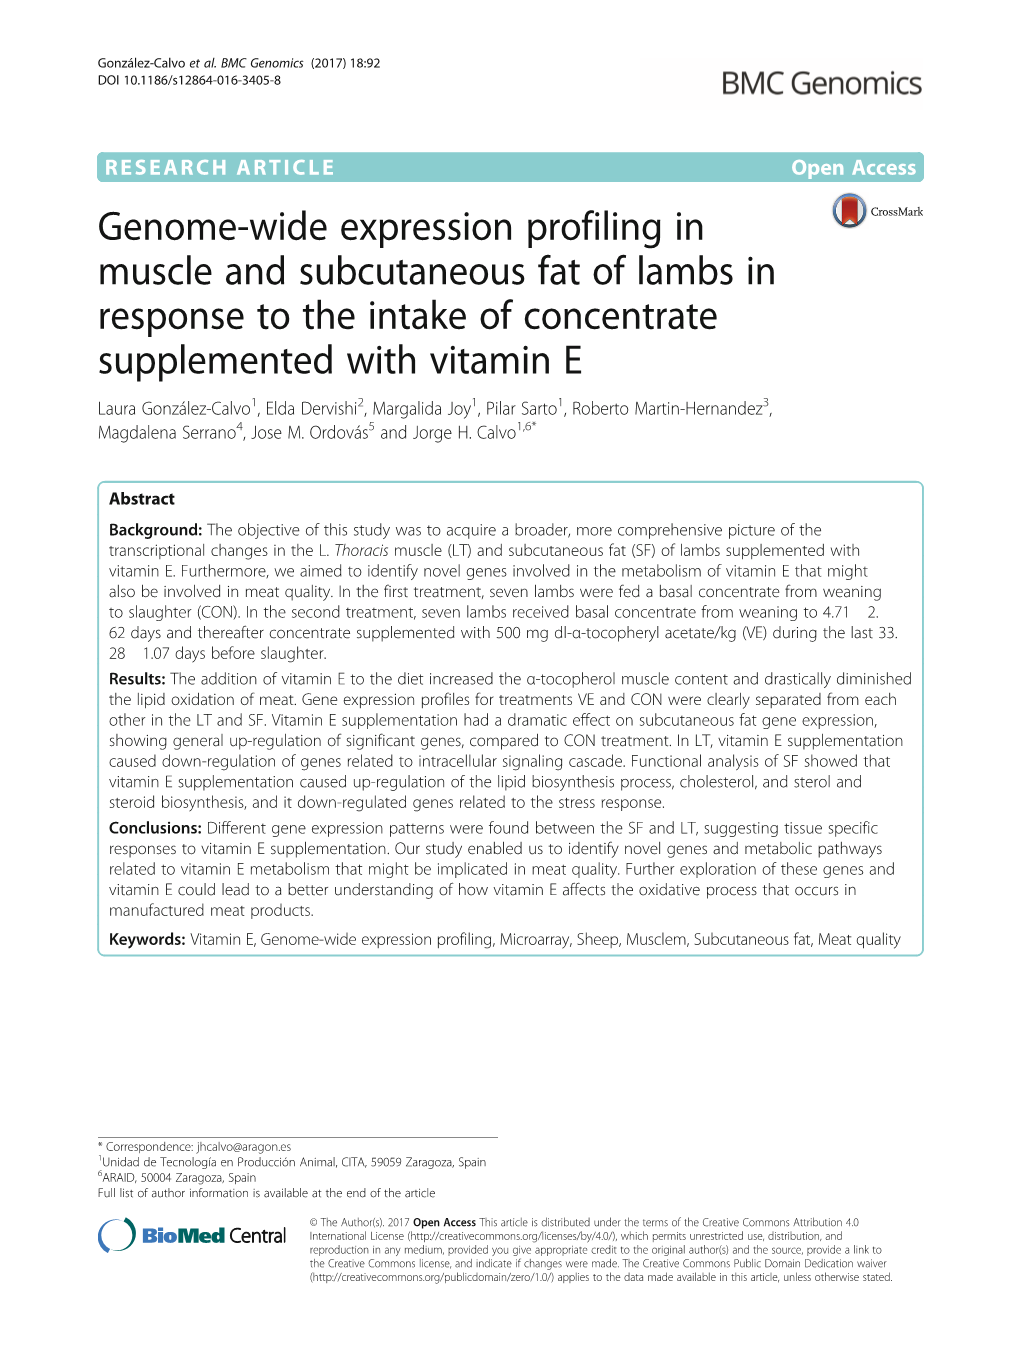 Genome-Wide Expression Profiling in Muscle and Subcutaneous Fat Of